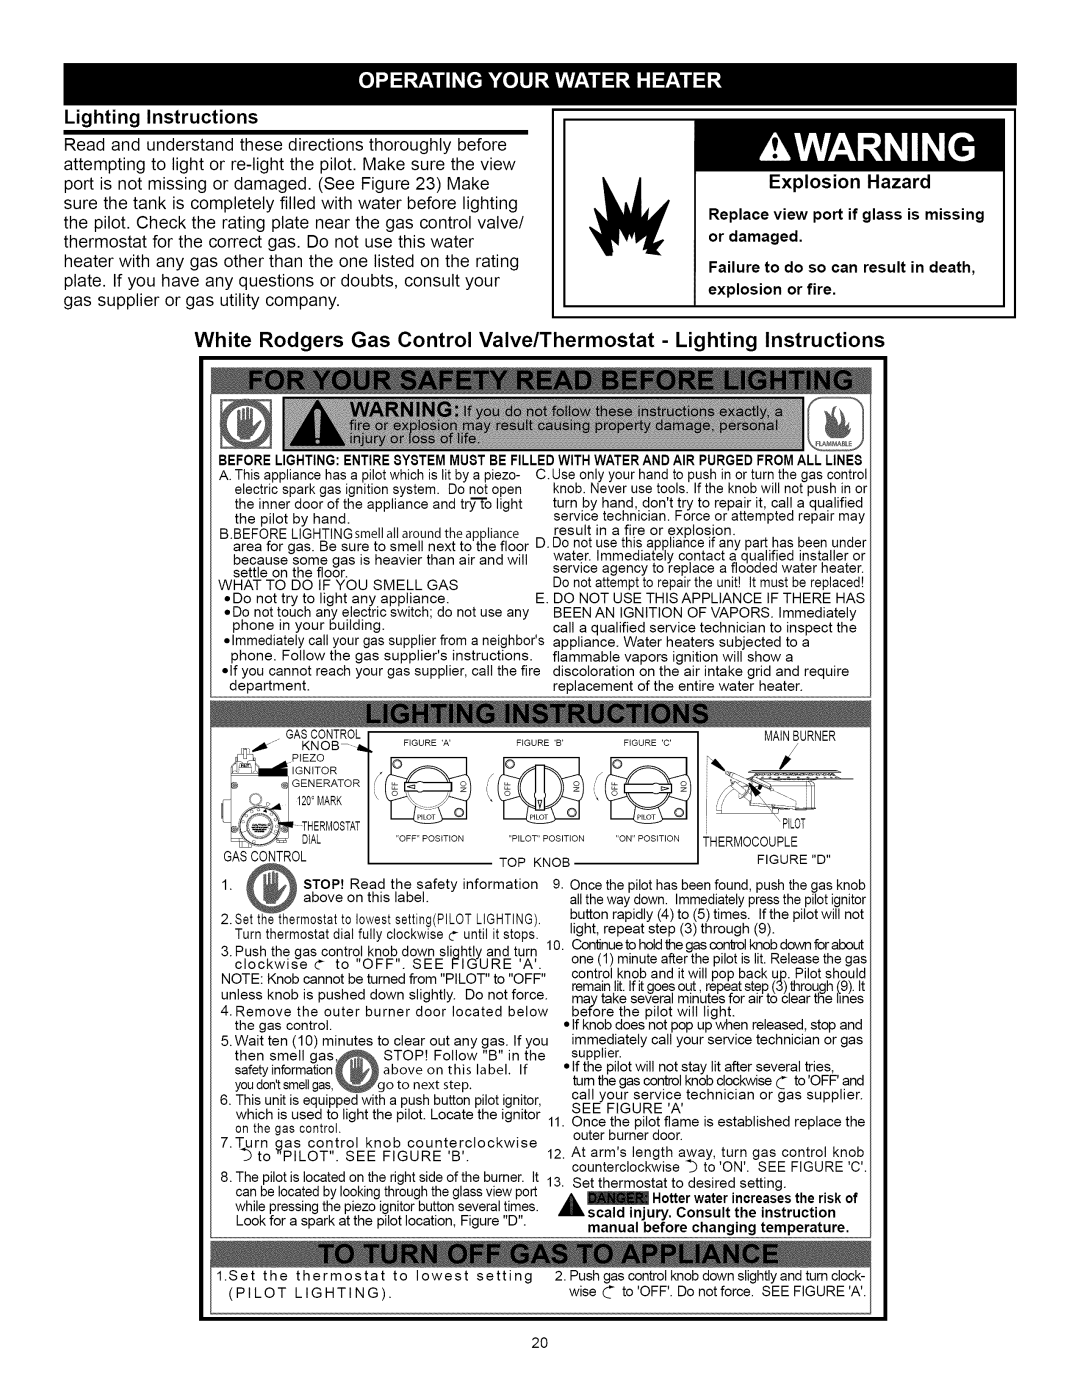 A.O. Smith Water Heater White Rodgers Gas Control Valve/Thermostat - Lighting Instructions, Explosion Hazard, If you, wise 